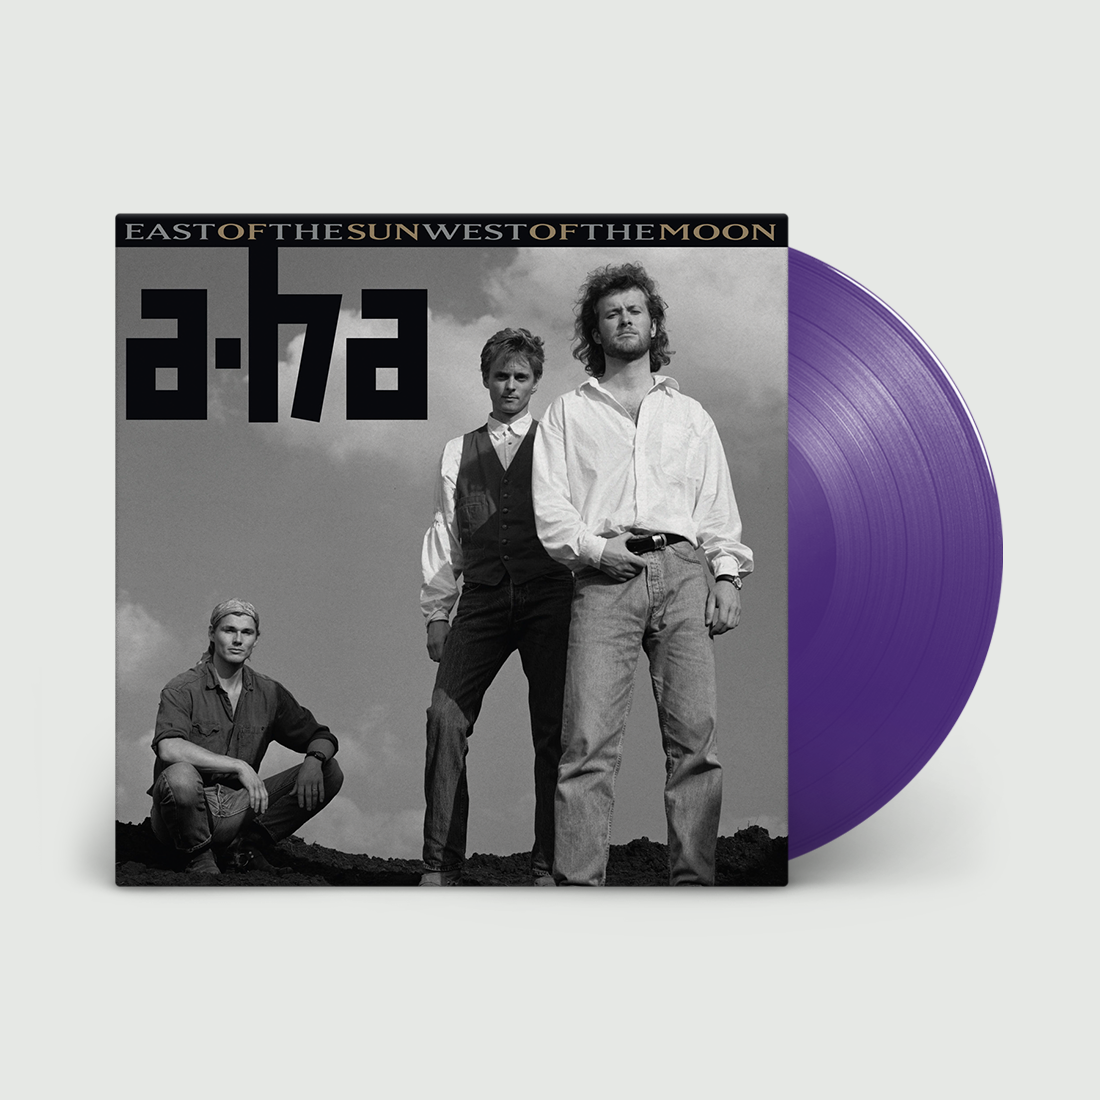 East Of The Sun West of The Moon: Limited Purple Vinyl LP